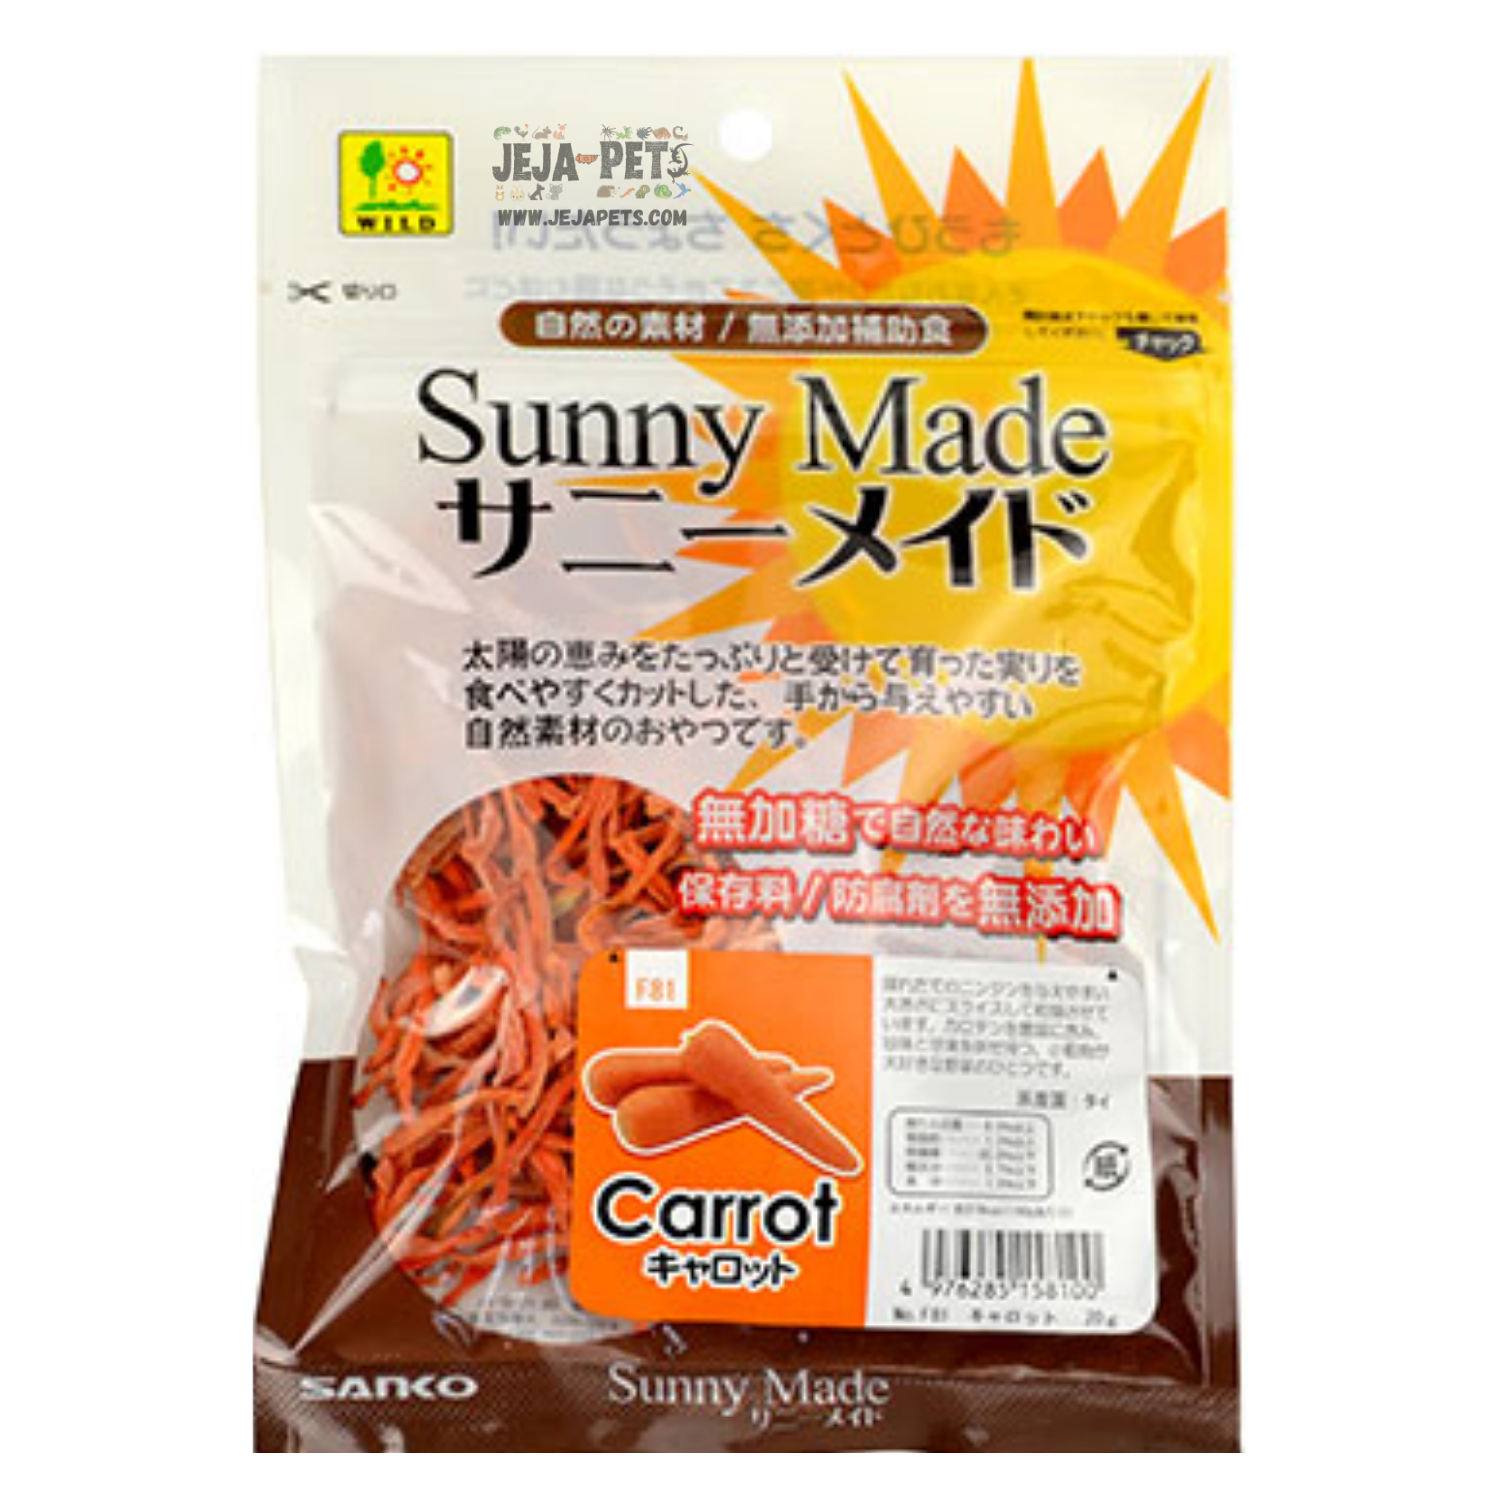 [DISCONTINUED] Sanko Wild Sunny Made Carrot - 20g